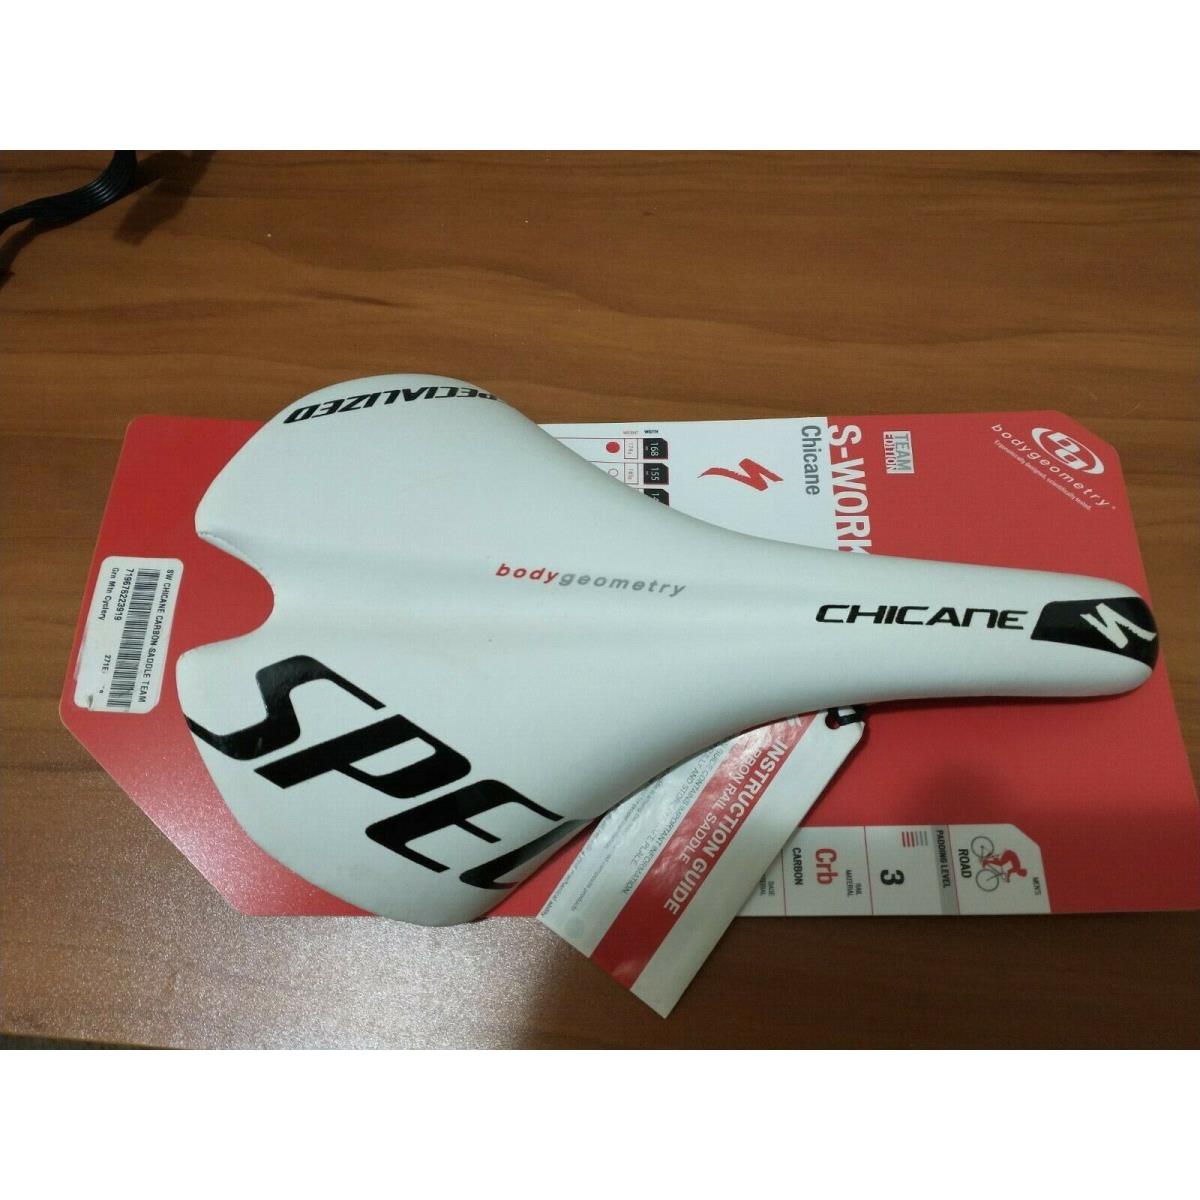 168mm Specialized S-works Chicane Pro Carbon Fiber Saddle Cycling Road Bike